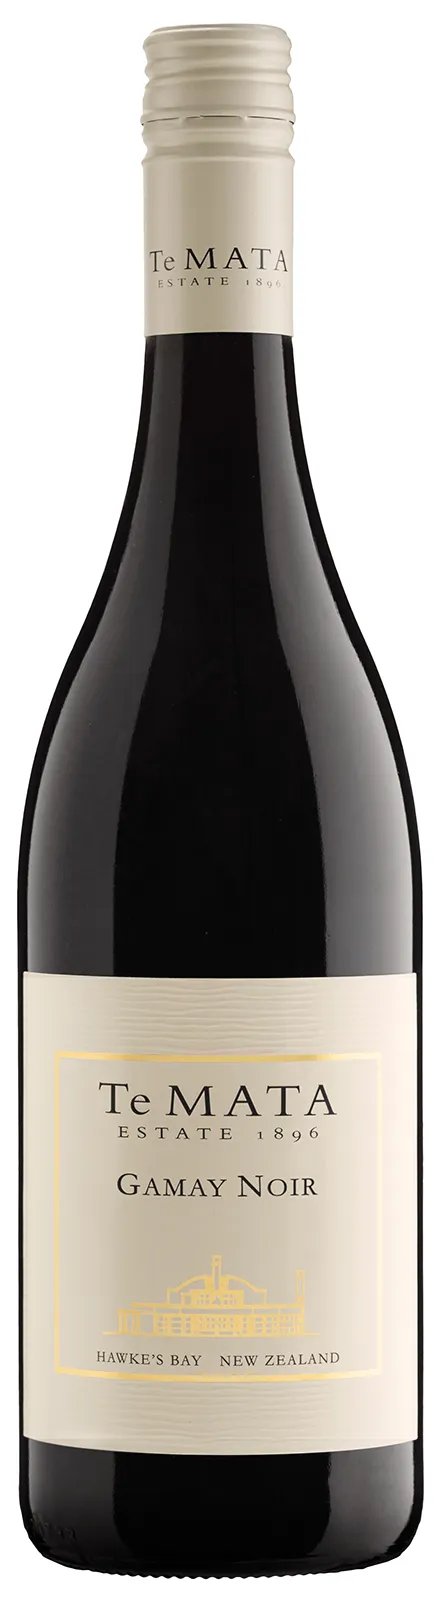 Bottle of Te Mata Gamay Noir from search results